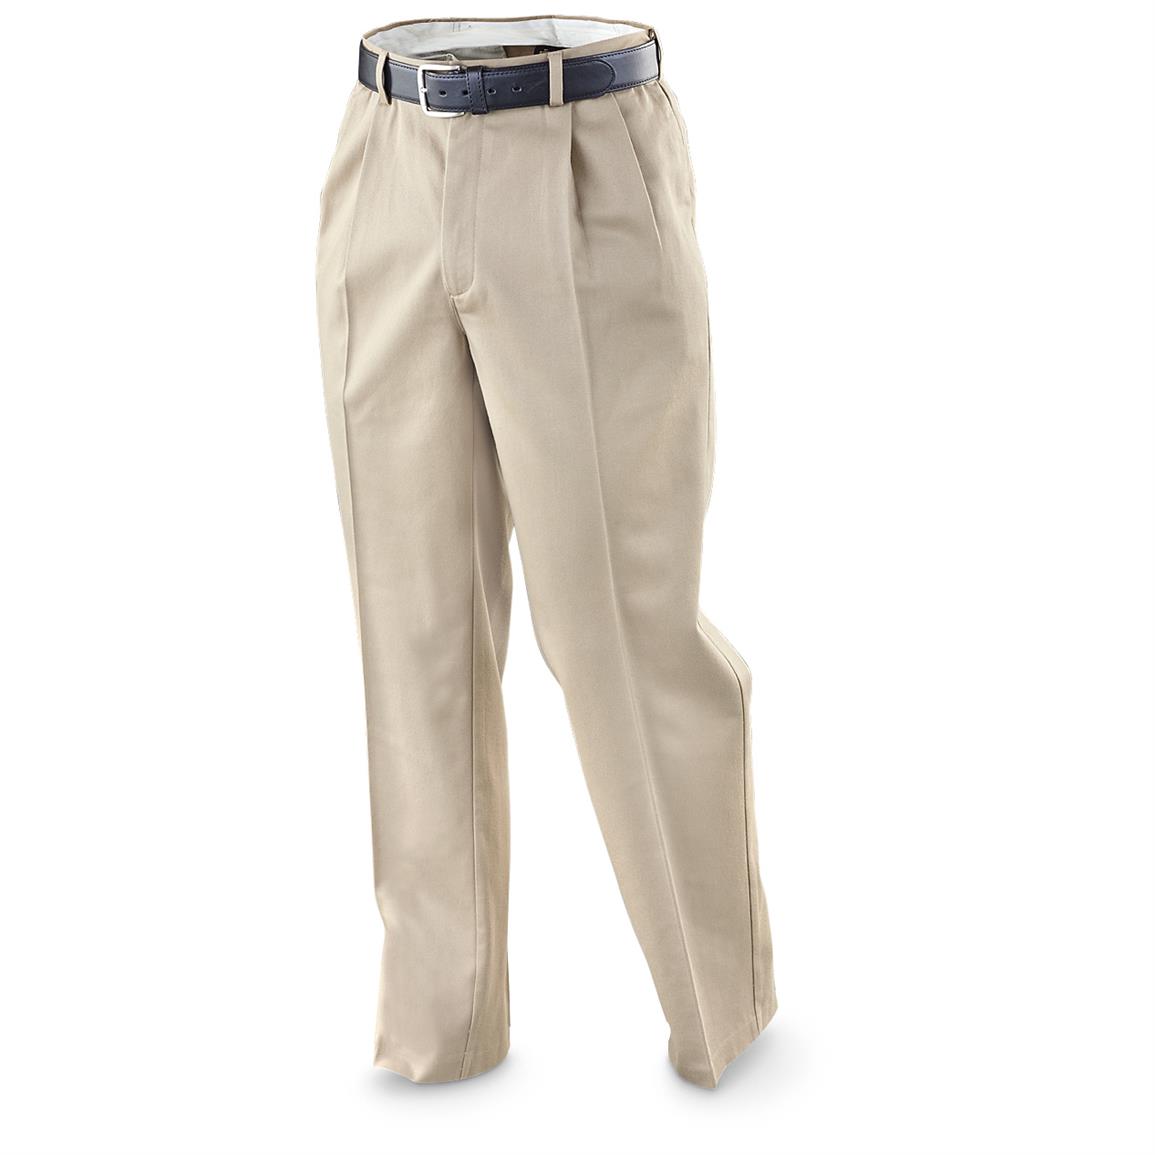 Guide Gear Men's Pleated Pants - 221609, Jeans & Pants at Sportsman's Guide